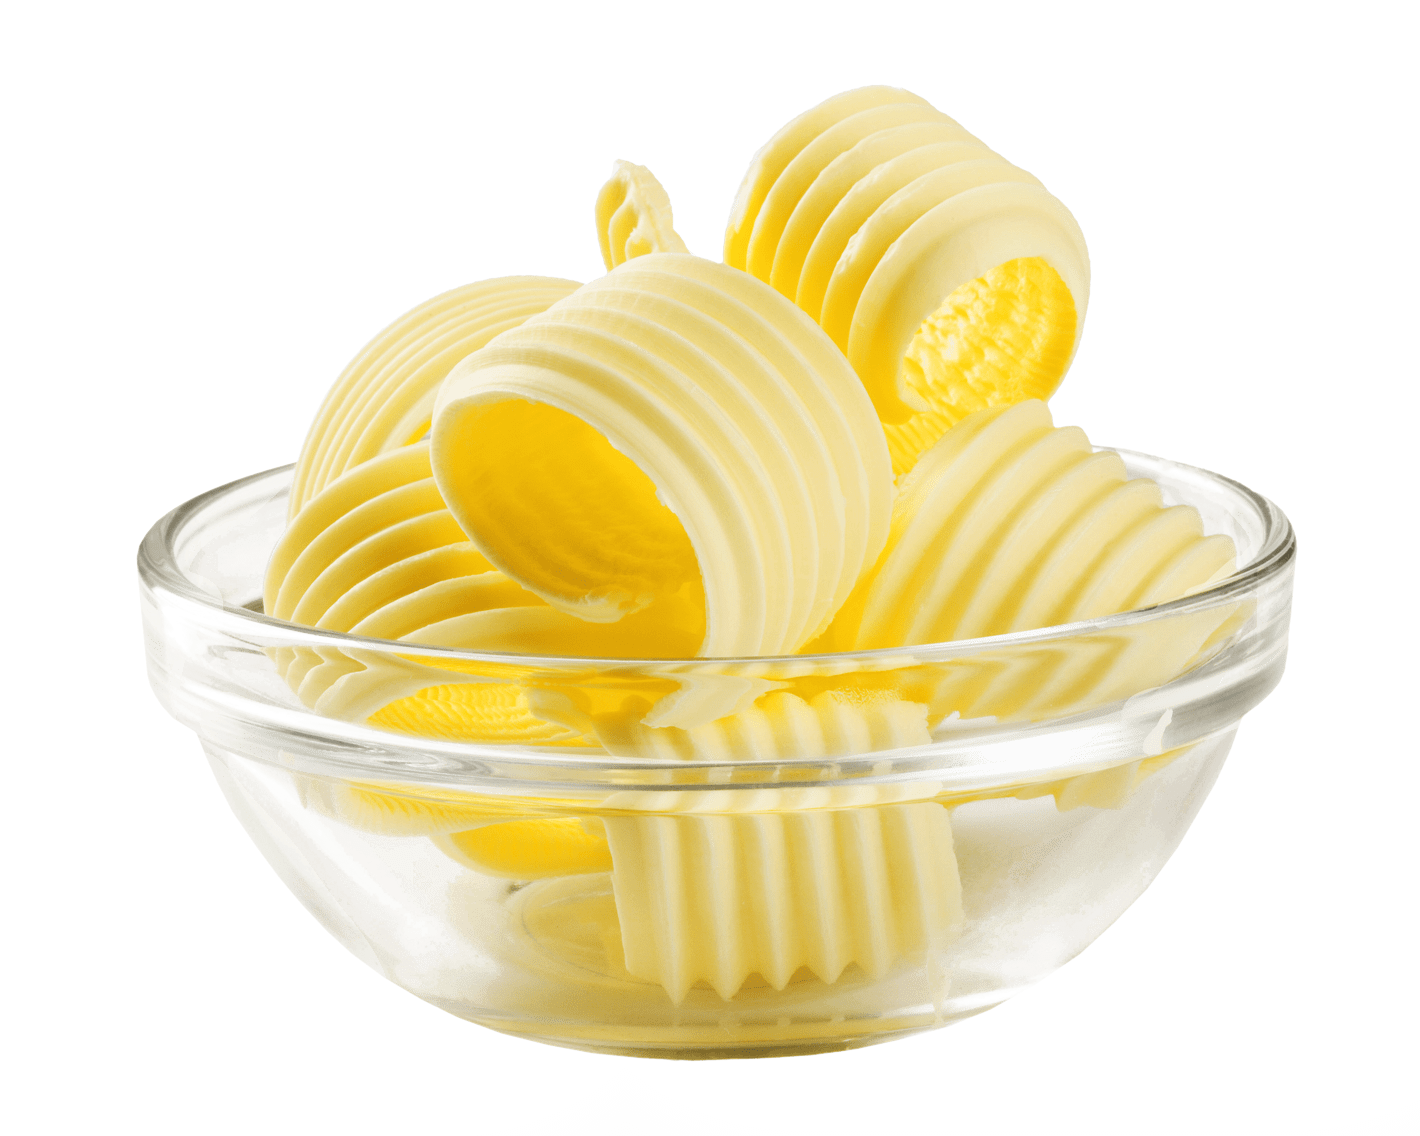 Swirls of cultured butter piled up in a bowl